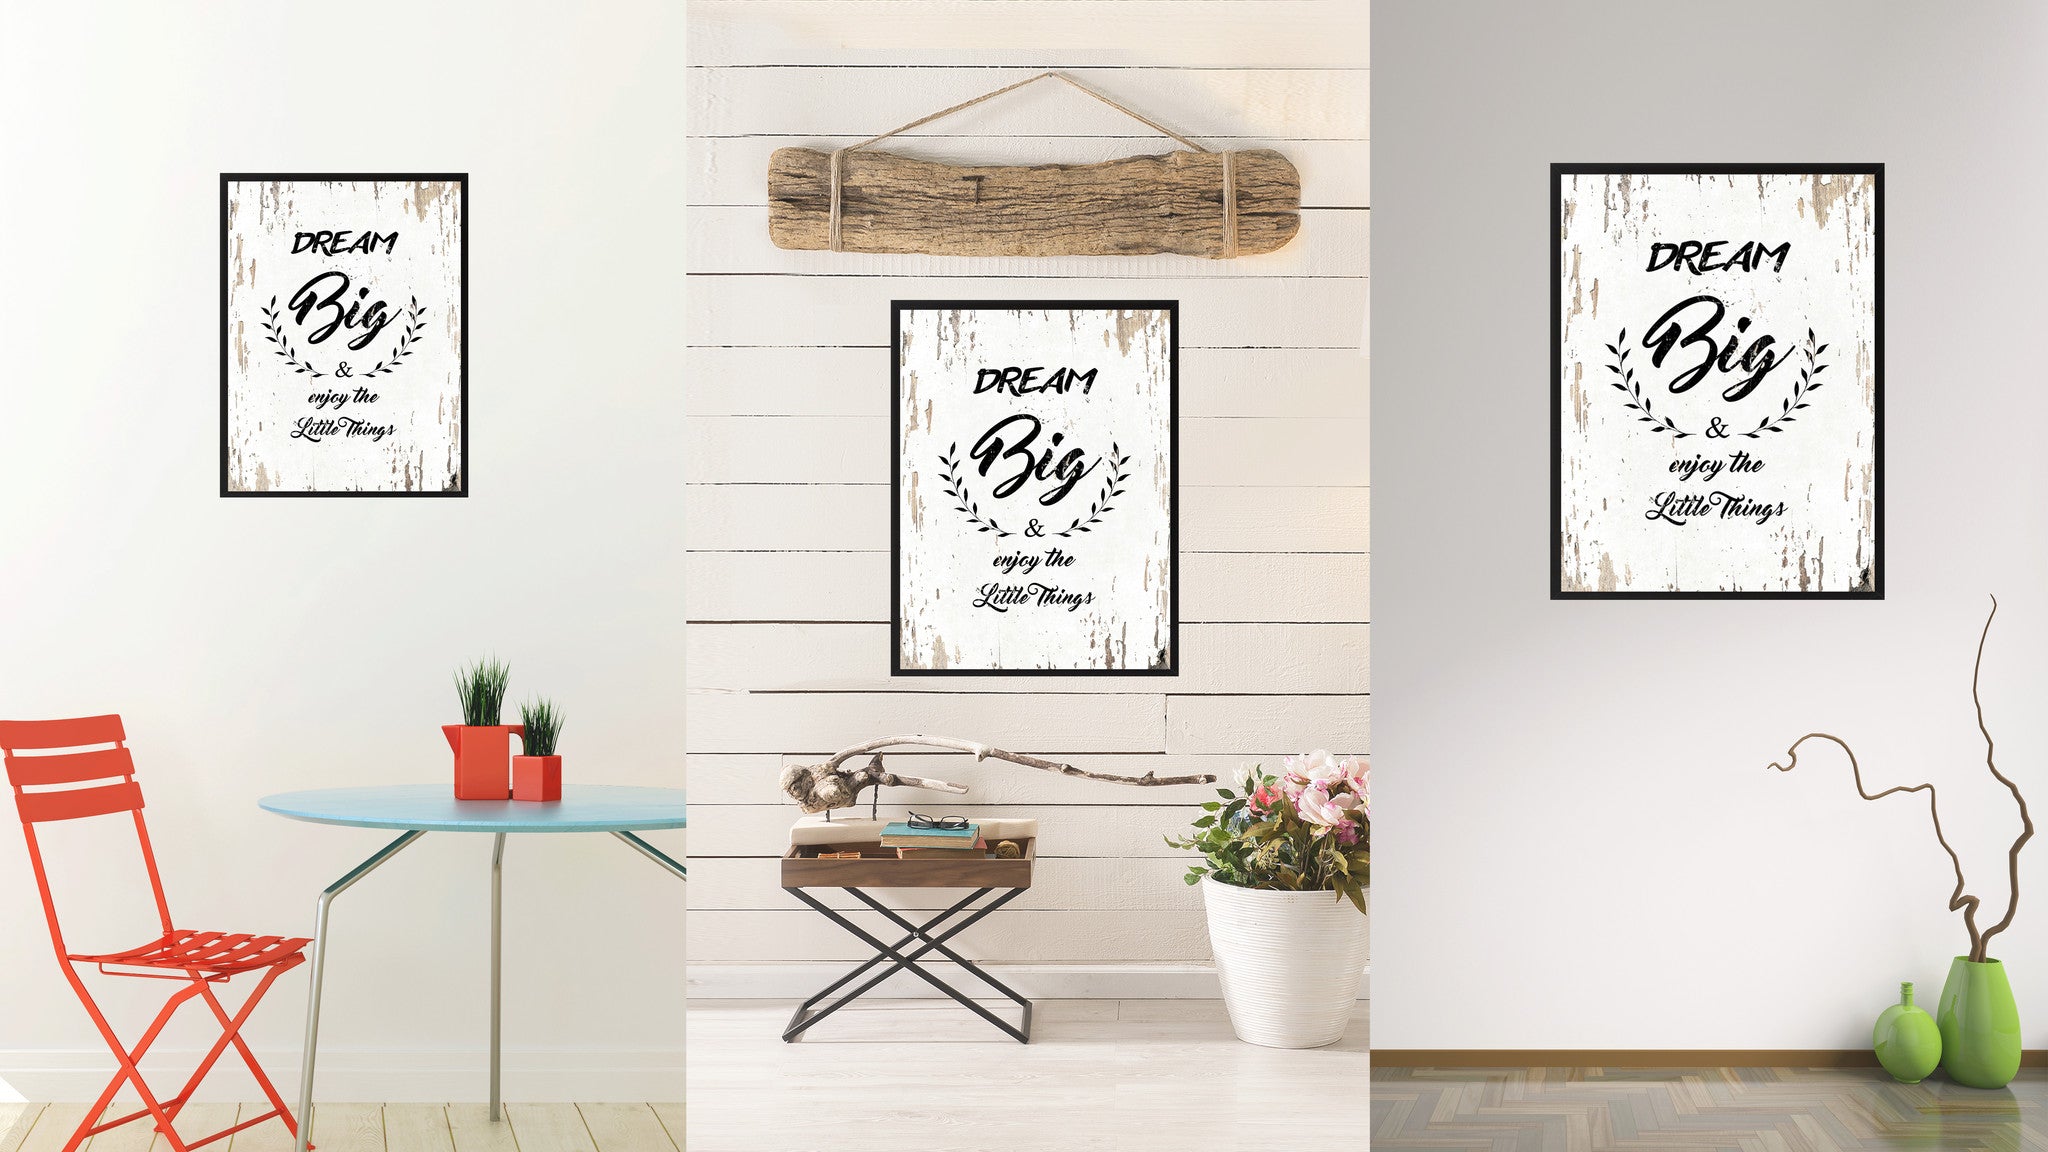 Dream big & enjoy the little things Inspirational Quote Saying Gift Ideas Home Decor Wall Art